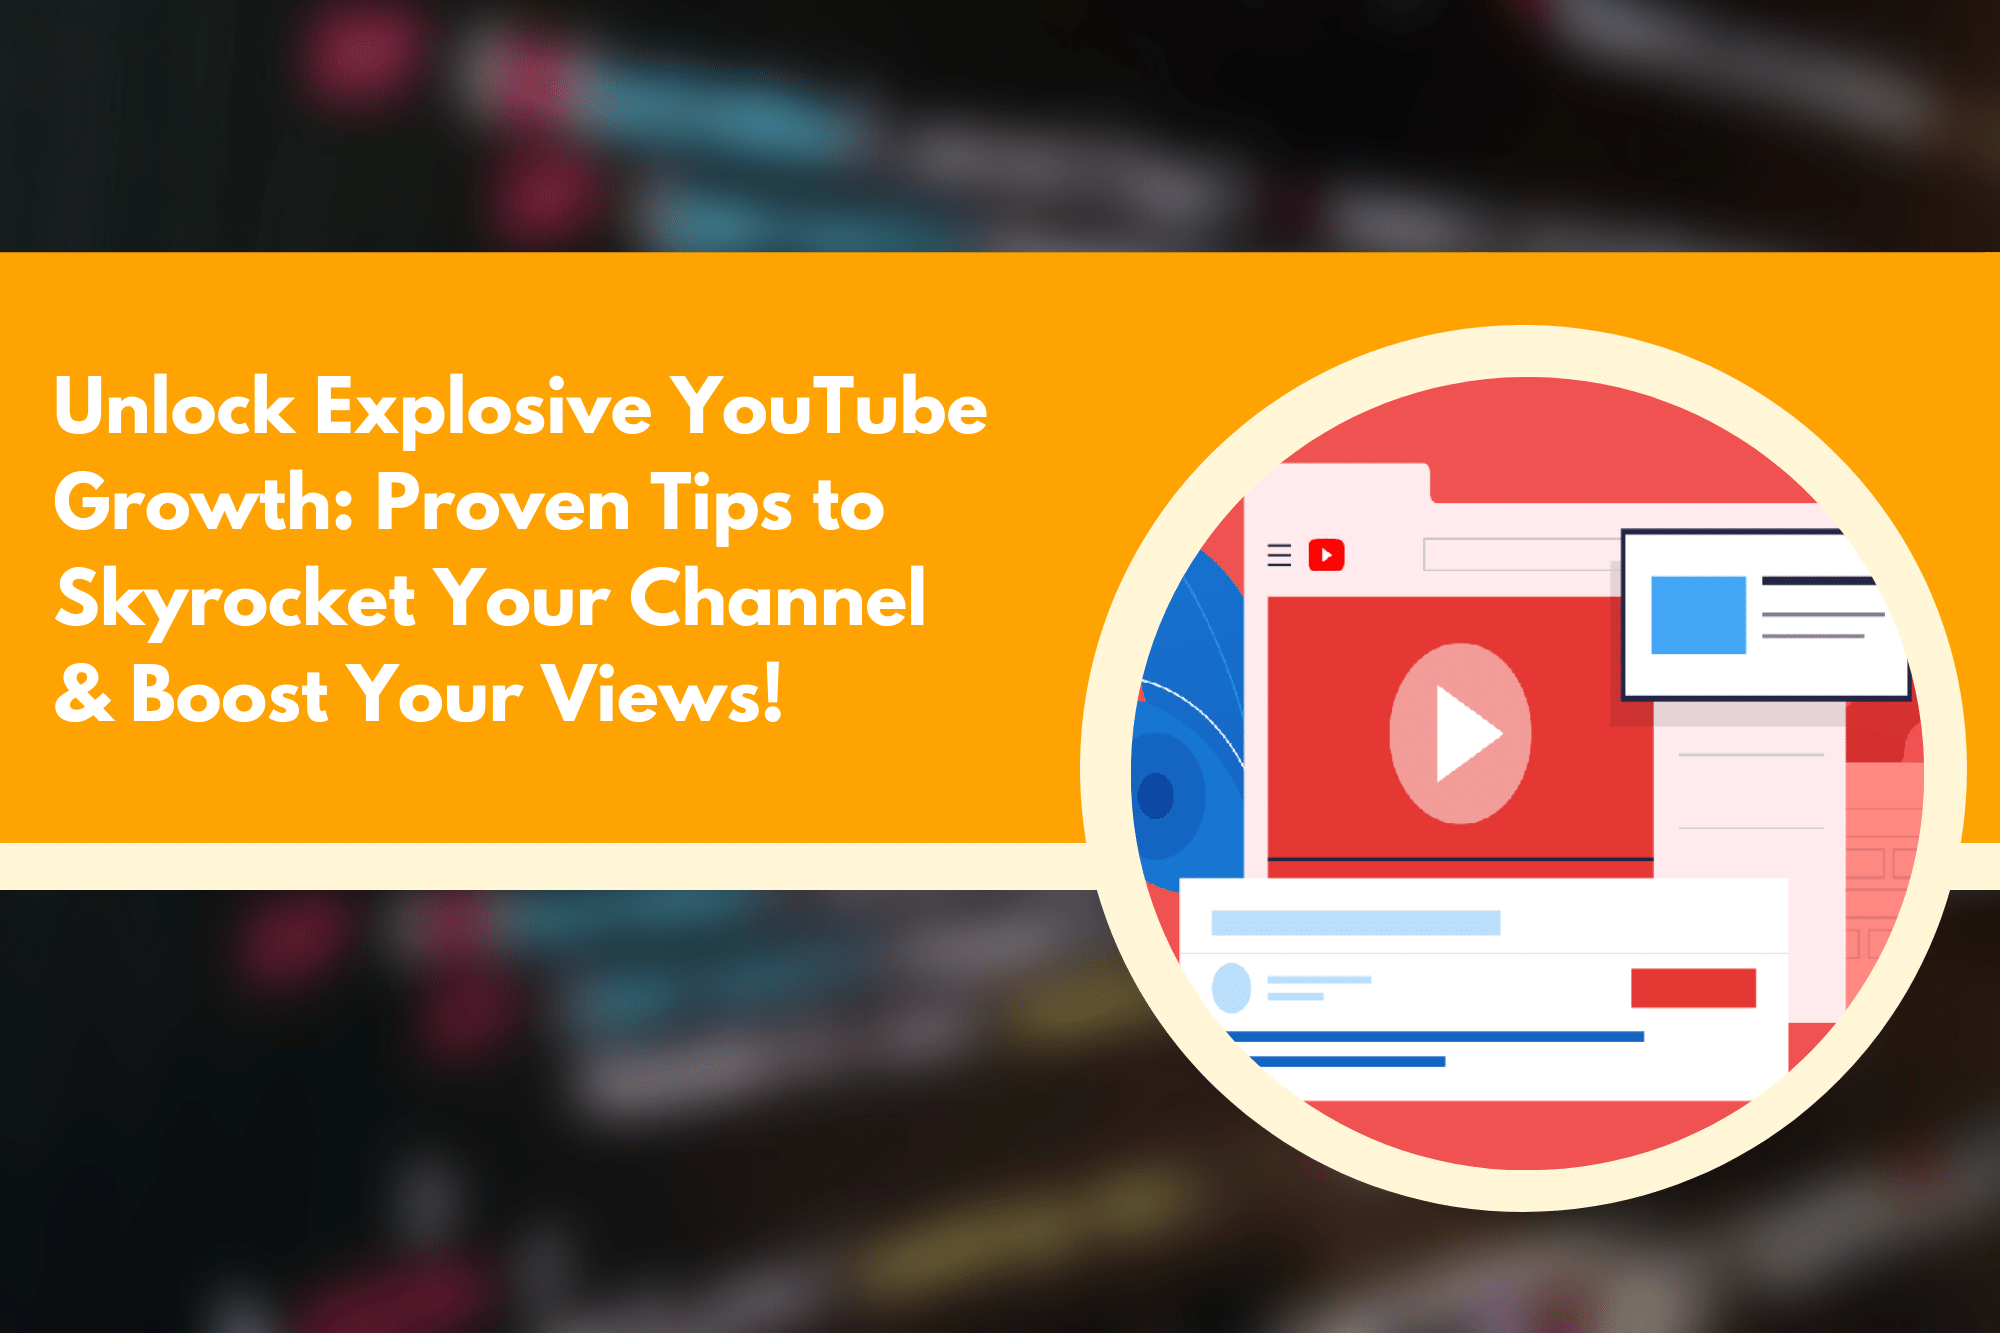 Unlock Explosive YouTube Growth Proven Tips to Skyrocket Your Channel & Boost Your Views!